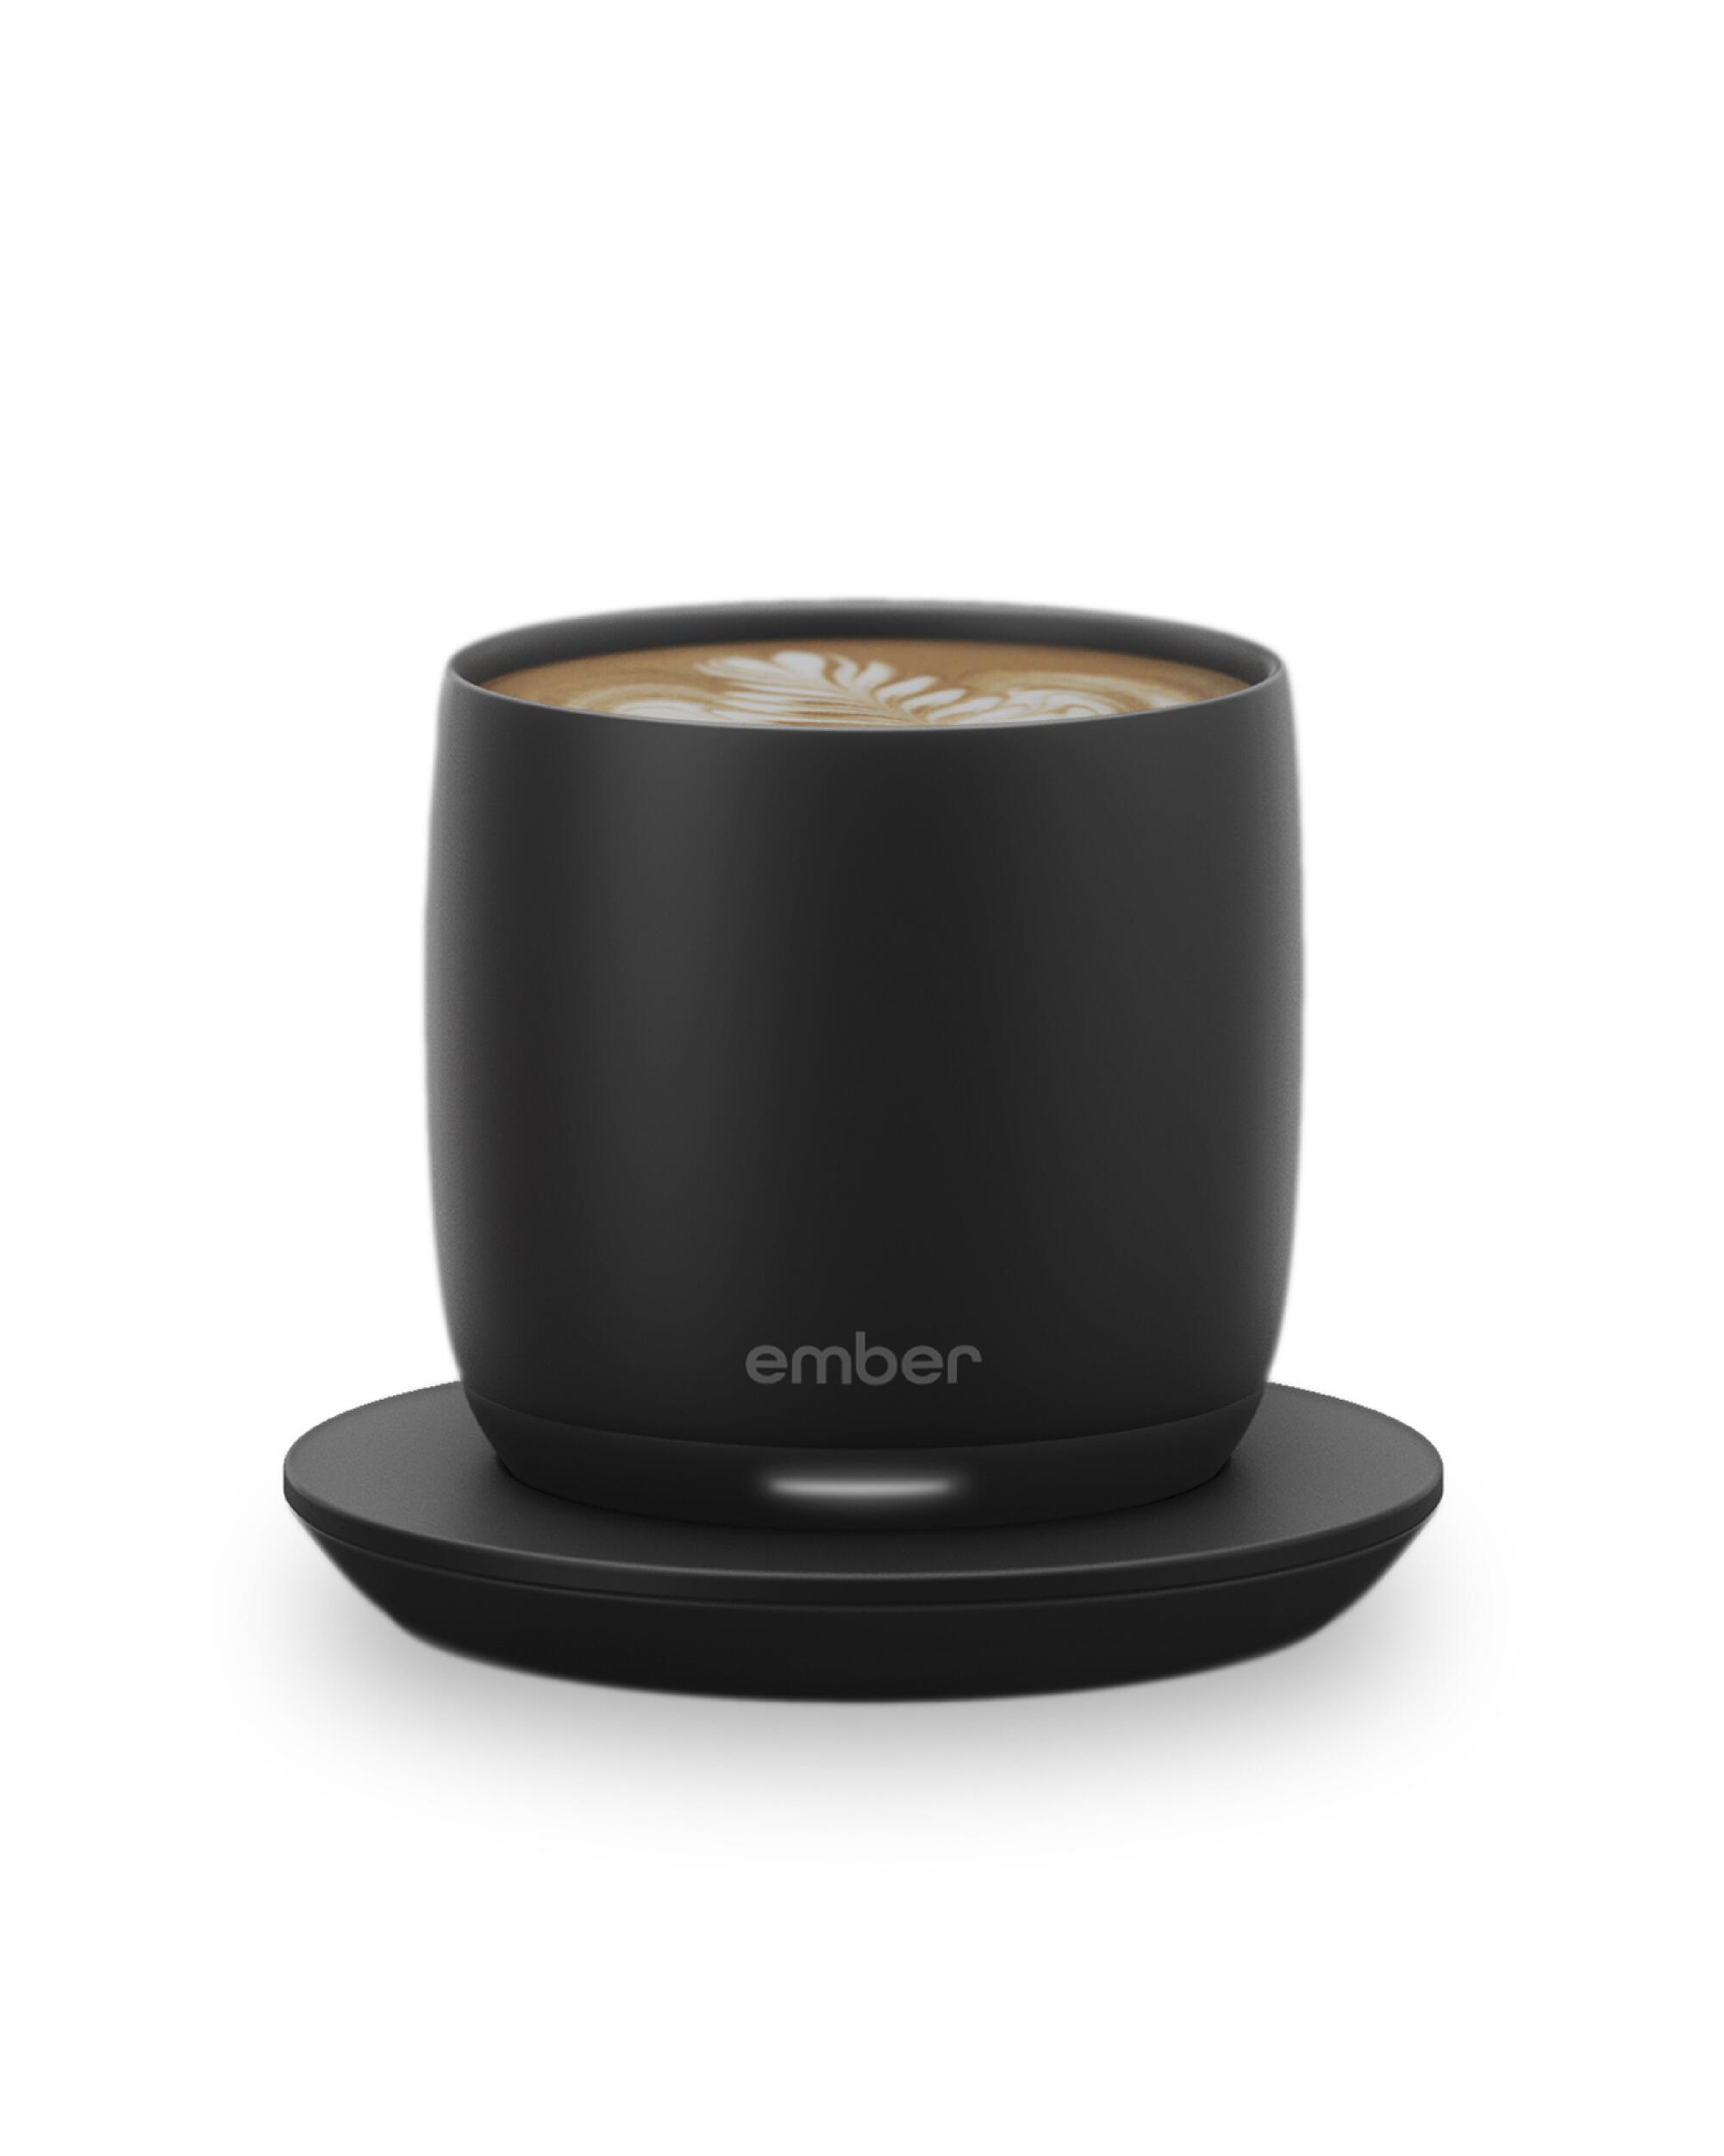 The Ember cup holding coffee